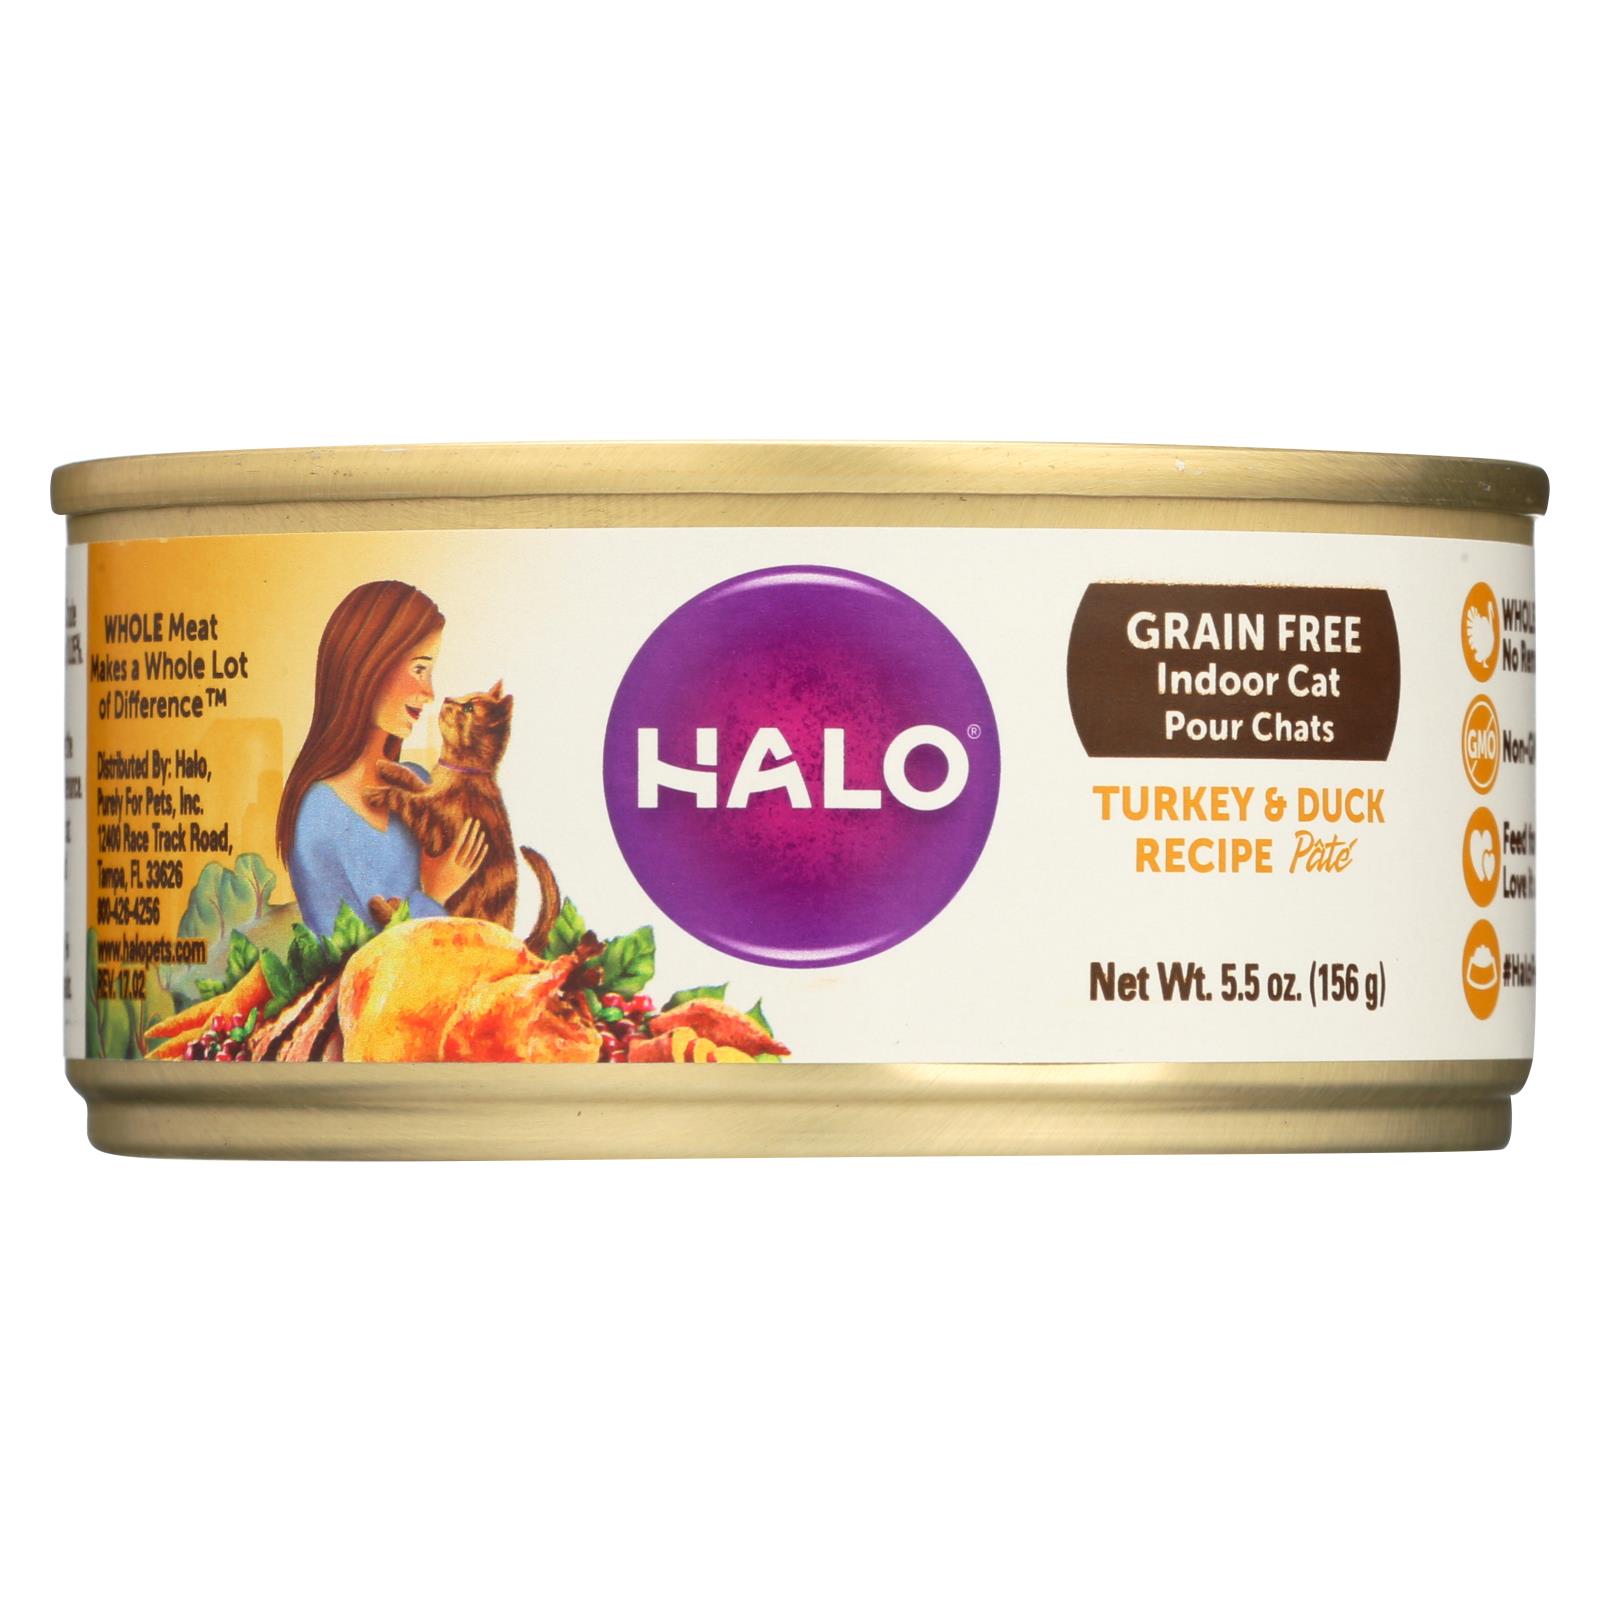 Halo, Purely For Pets Indoor Cat, Grain Free Turkey & Duck Recipe Pate - 12개 묶음상품 - 5.5 OZ